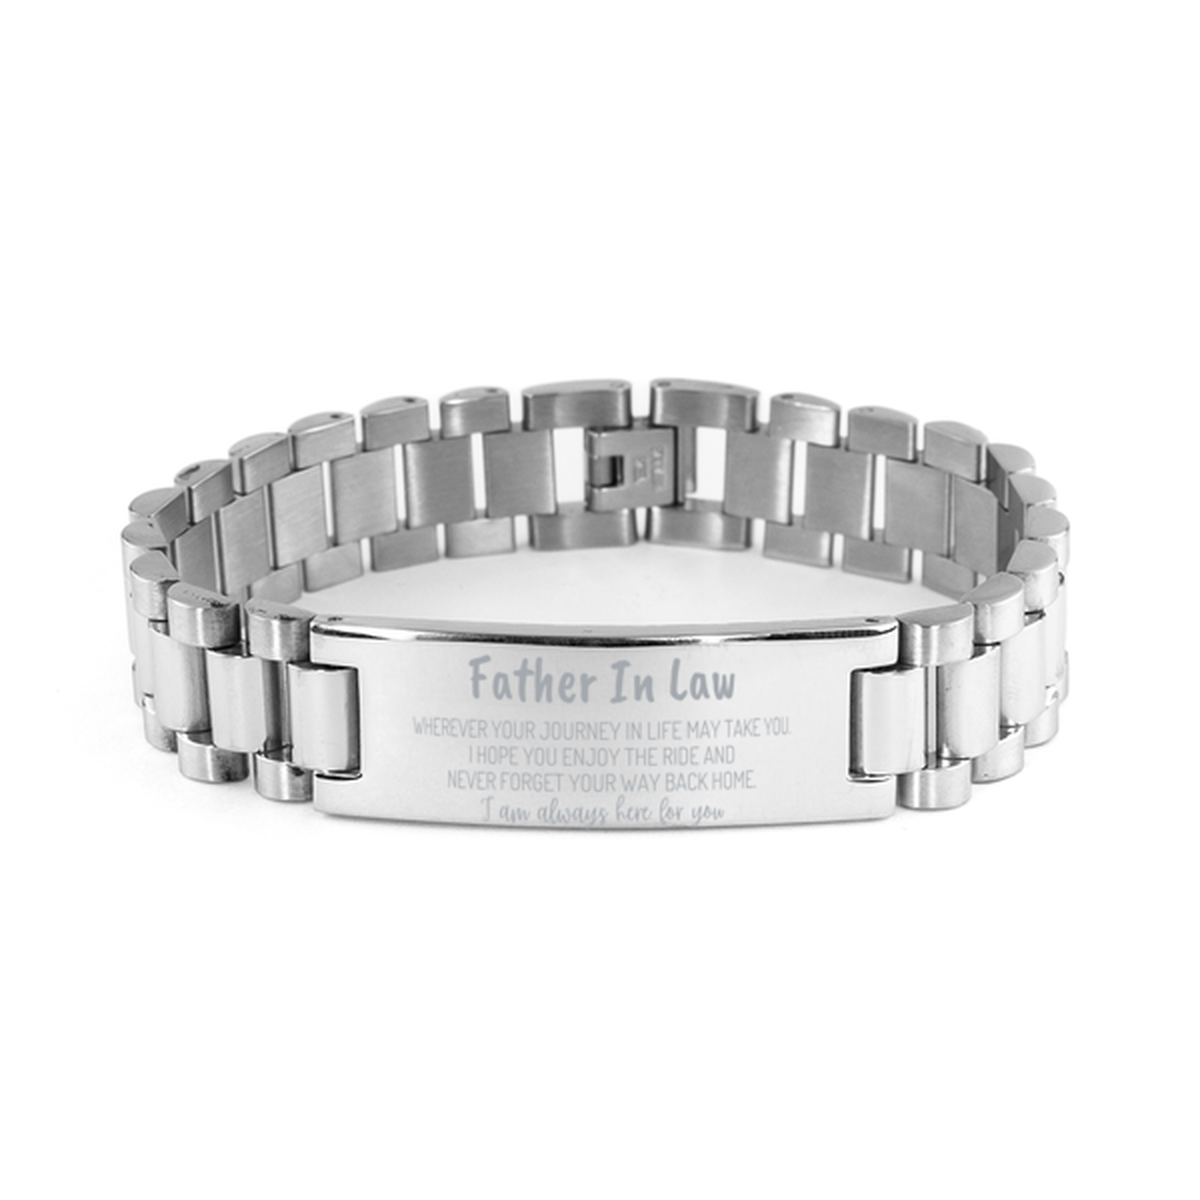 Father In Law wherever your journey in life may take you, I am always here for you Father In Law Ladder Stainless Steel Bracelet, Awesome Christmas Gifts For Father In Law, Father In Law Birthday Gifts for Men Women Family Loved One